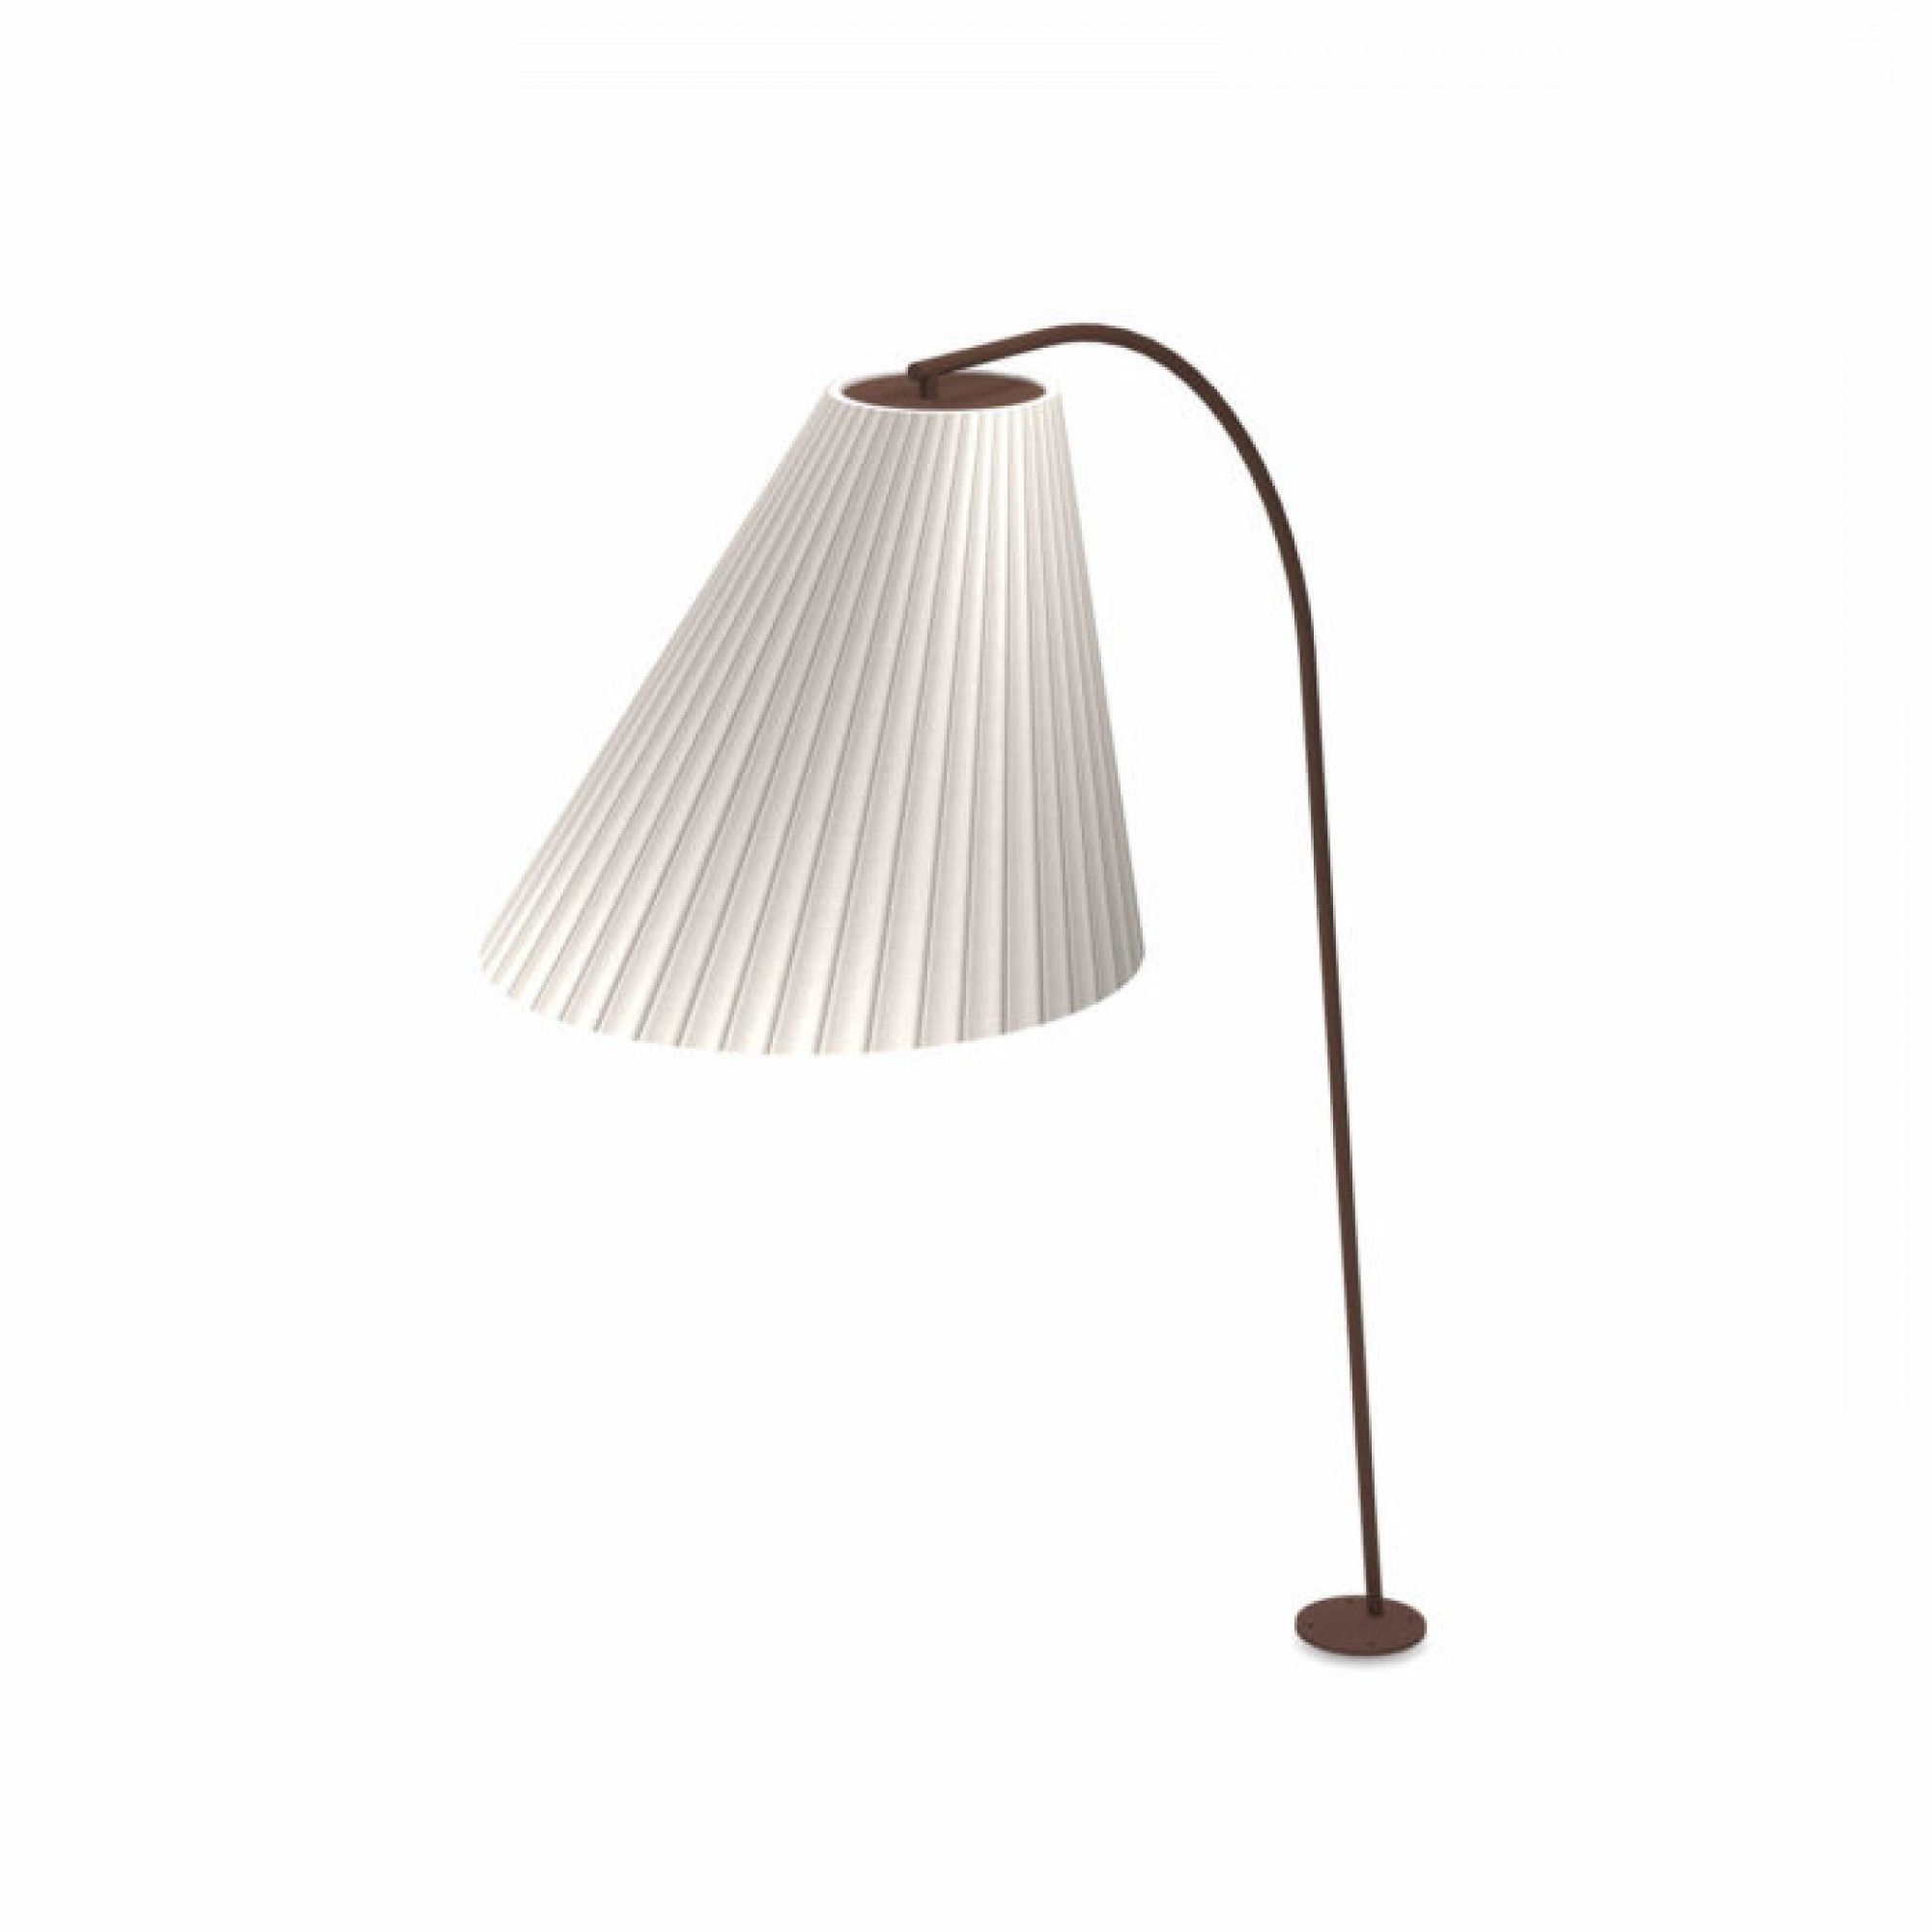 Cone 2004 | Floor / Table Lamps | Lighting | Emu – Masonionline Pertaining To Cone Floor Lamps (View 18 of 20)